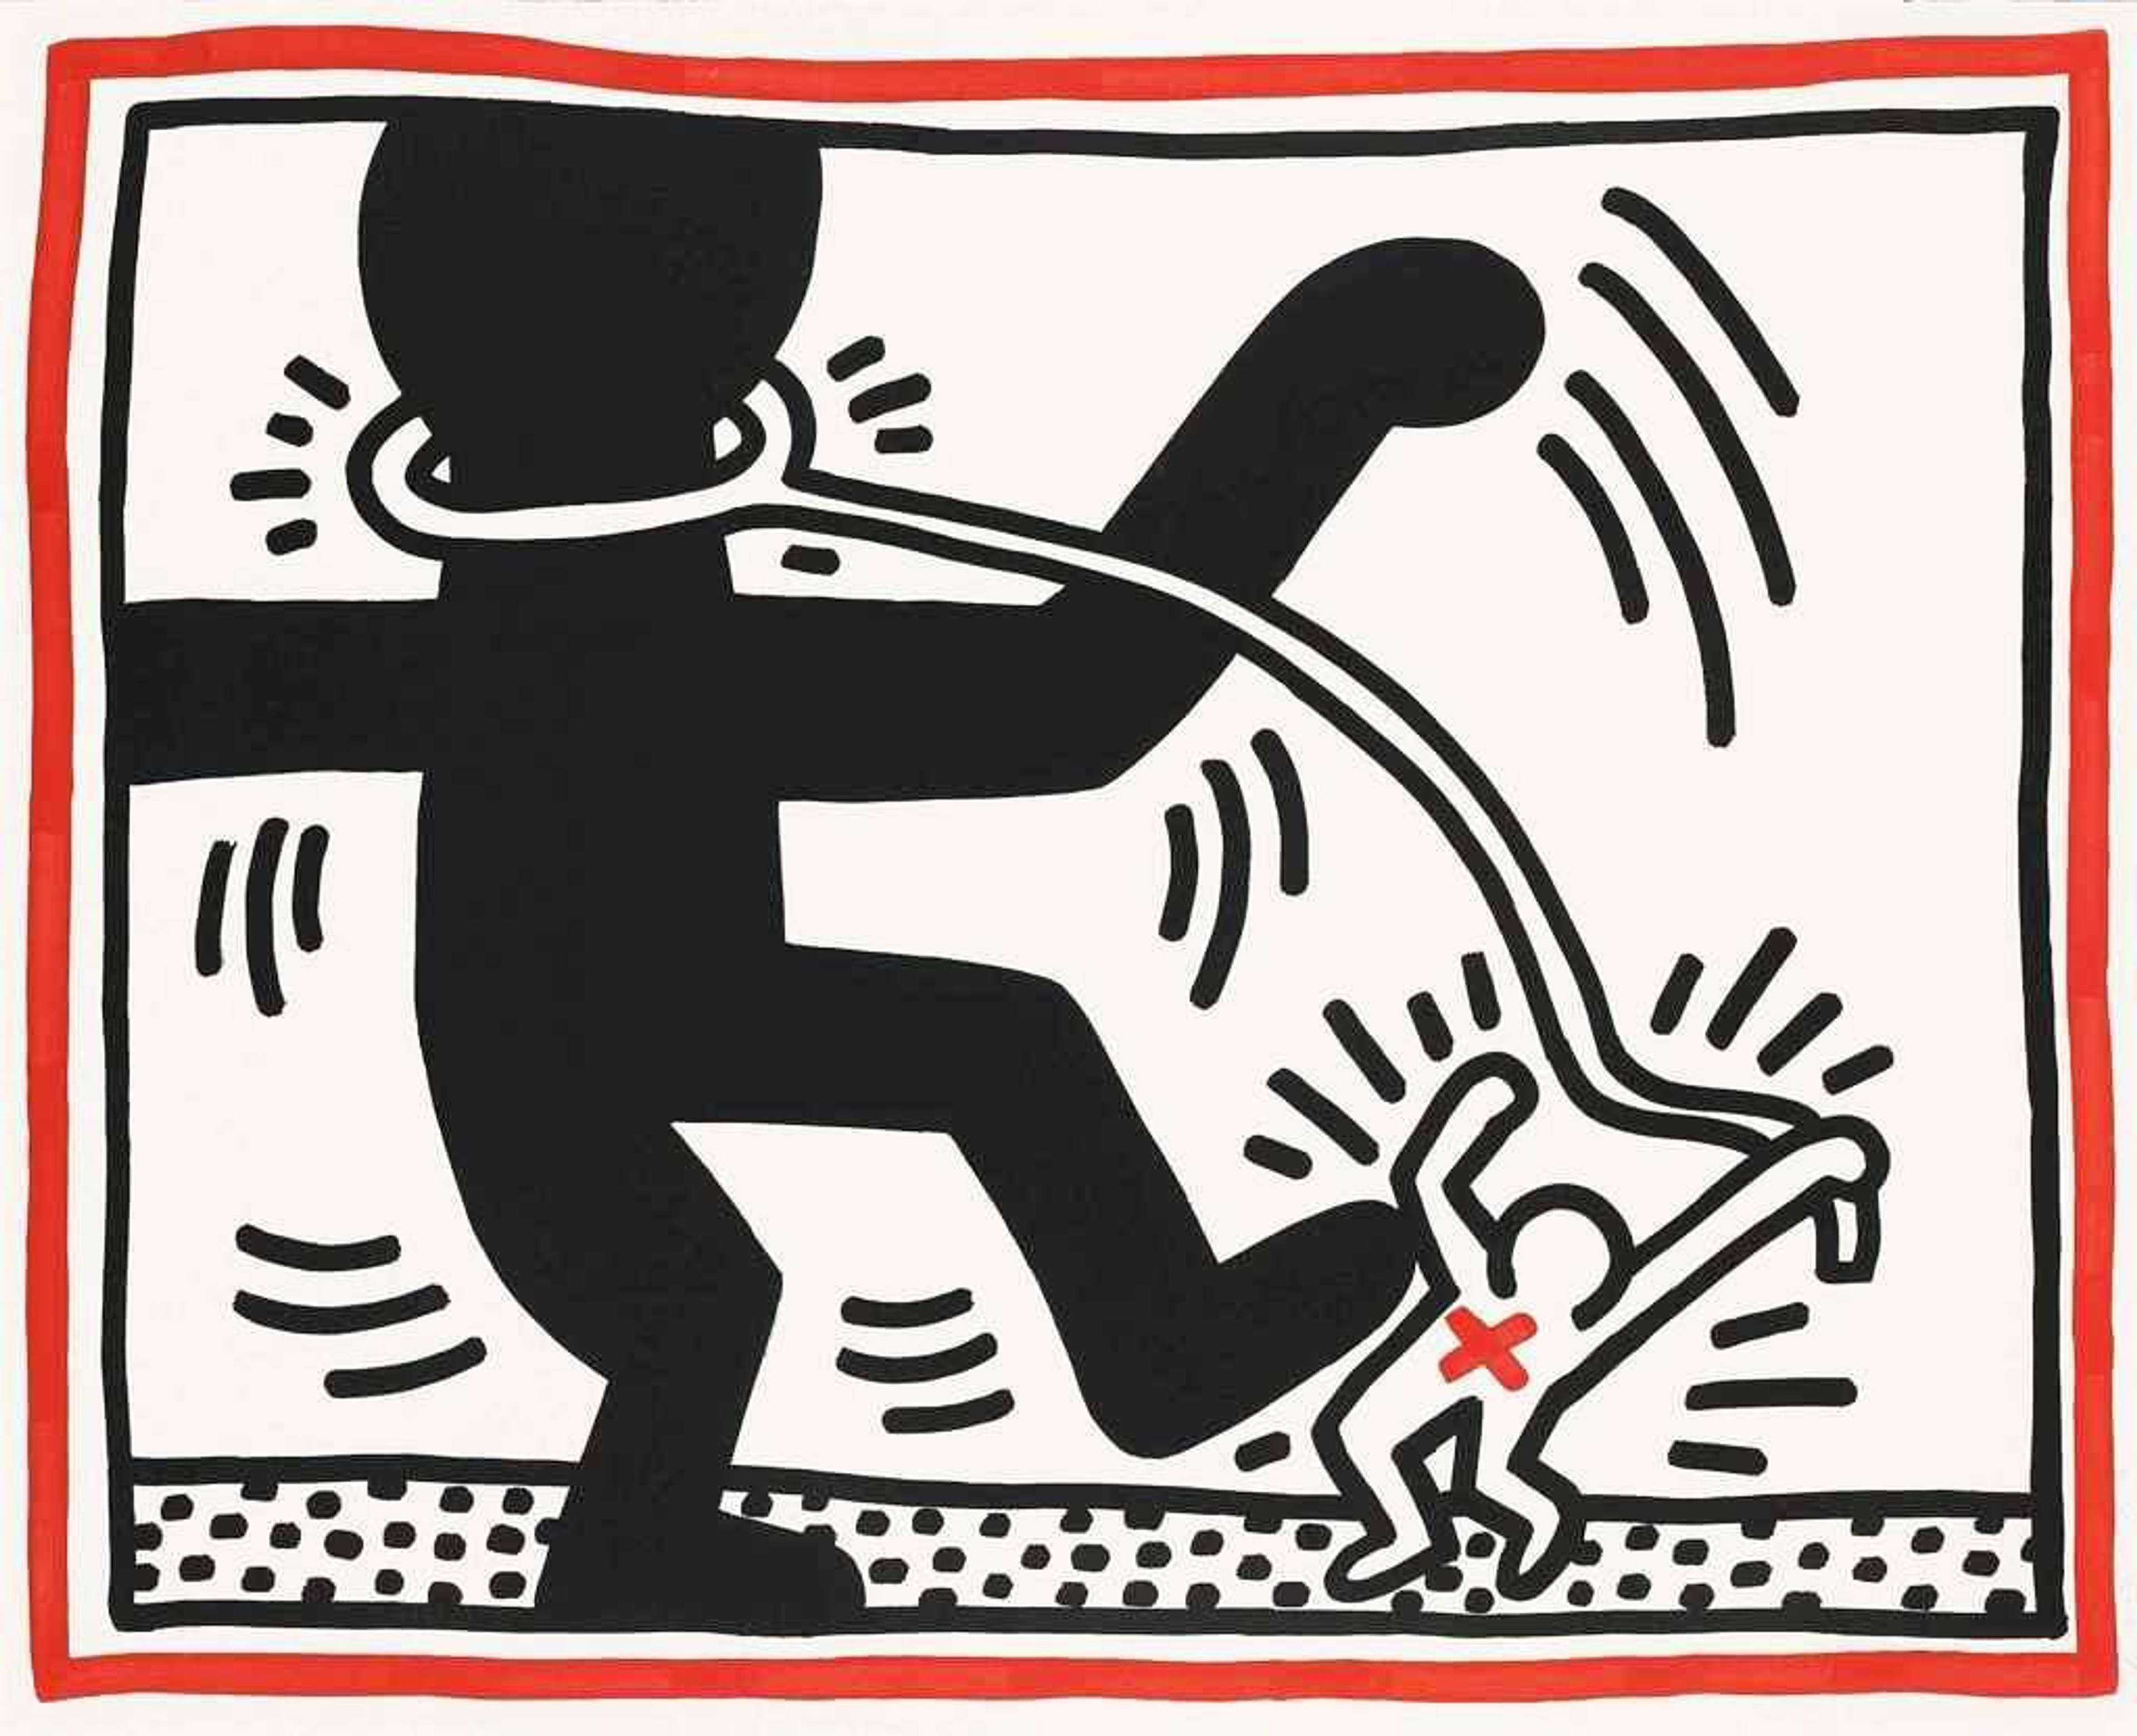 Depicted in Haring’s bold, linear style, Free South Africa 2 shows two figures in a struggle with one another, the larger Black figure with a rope around its neck. 